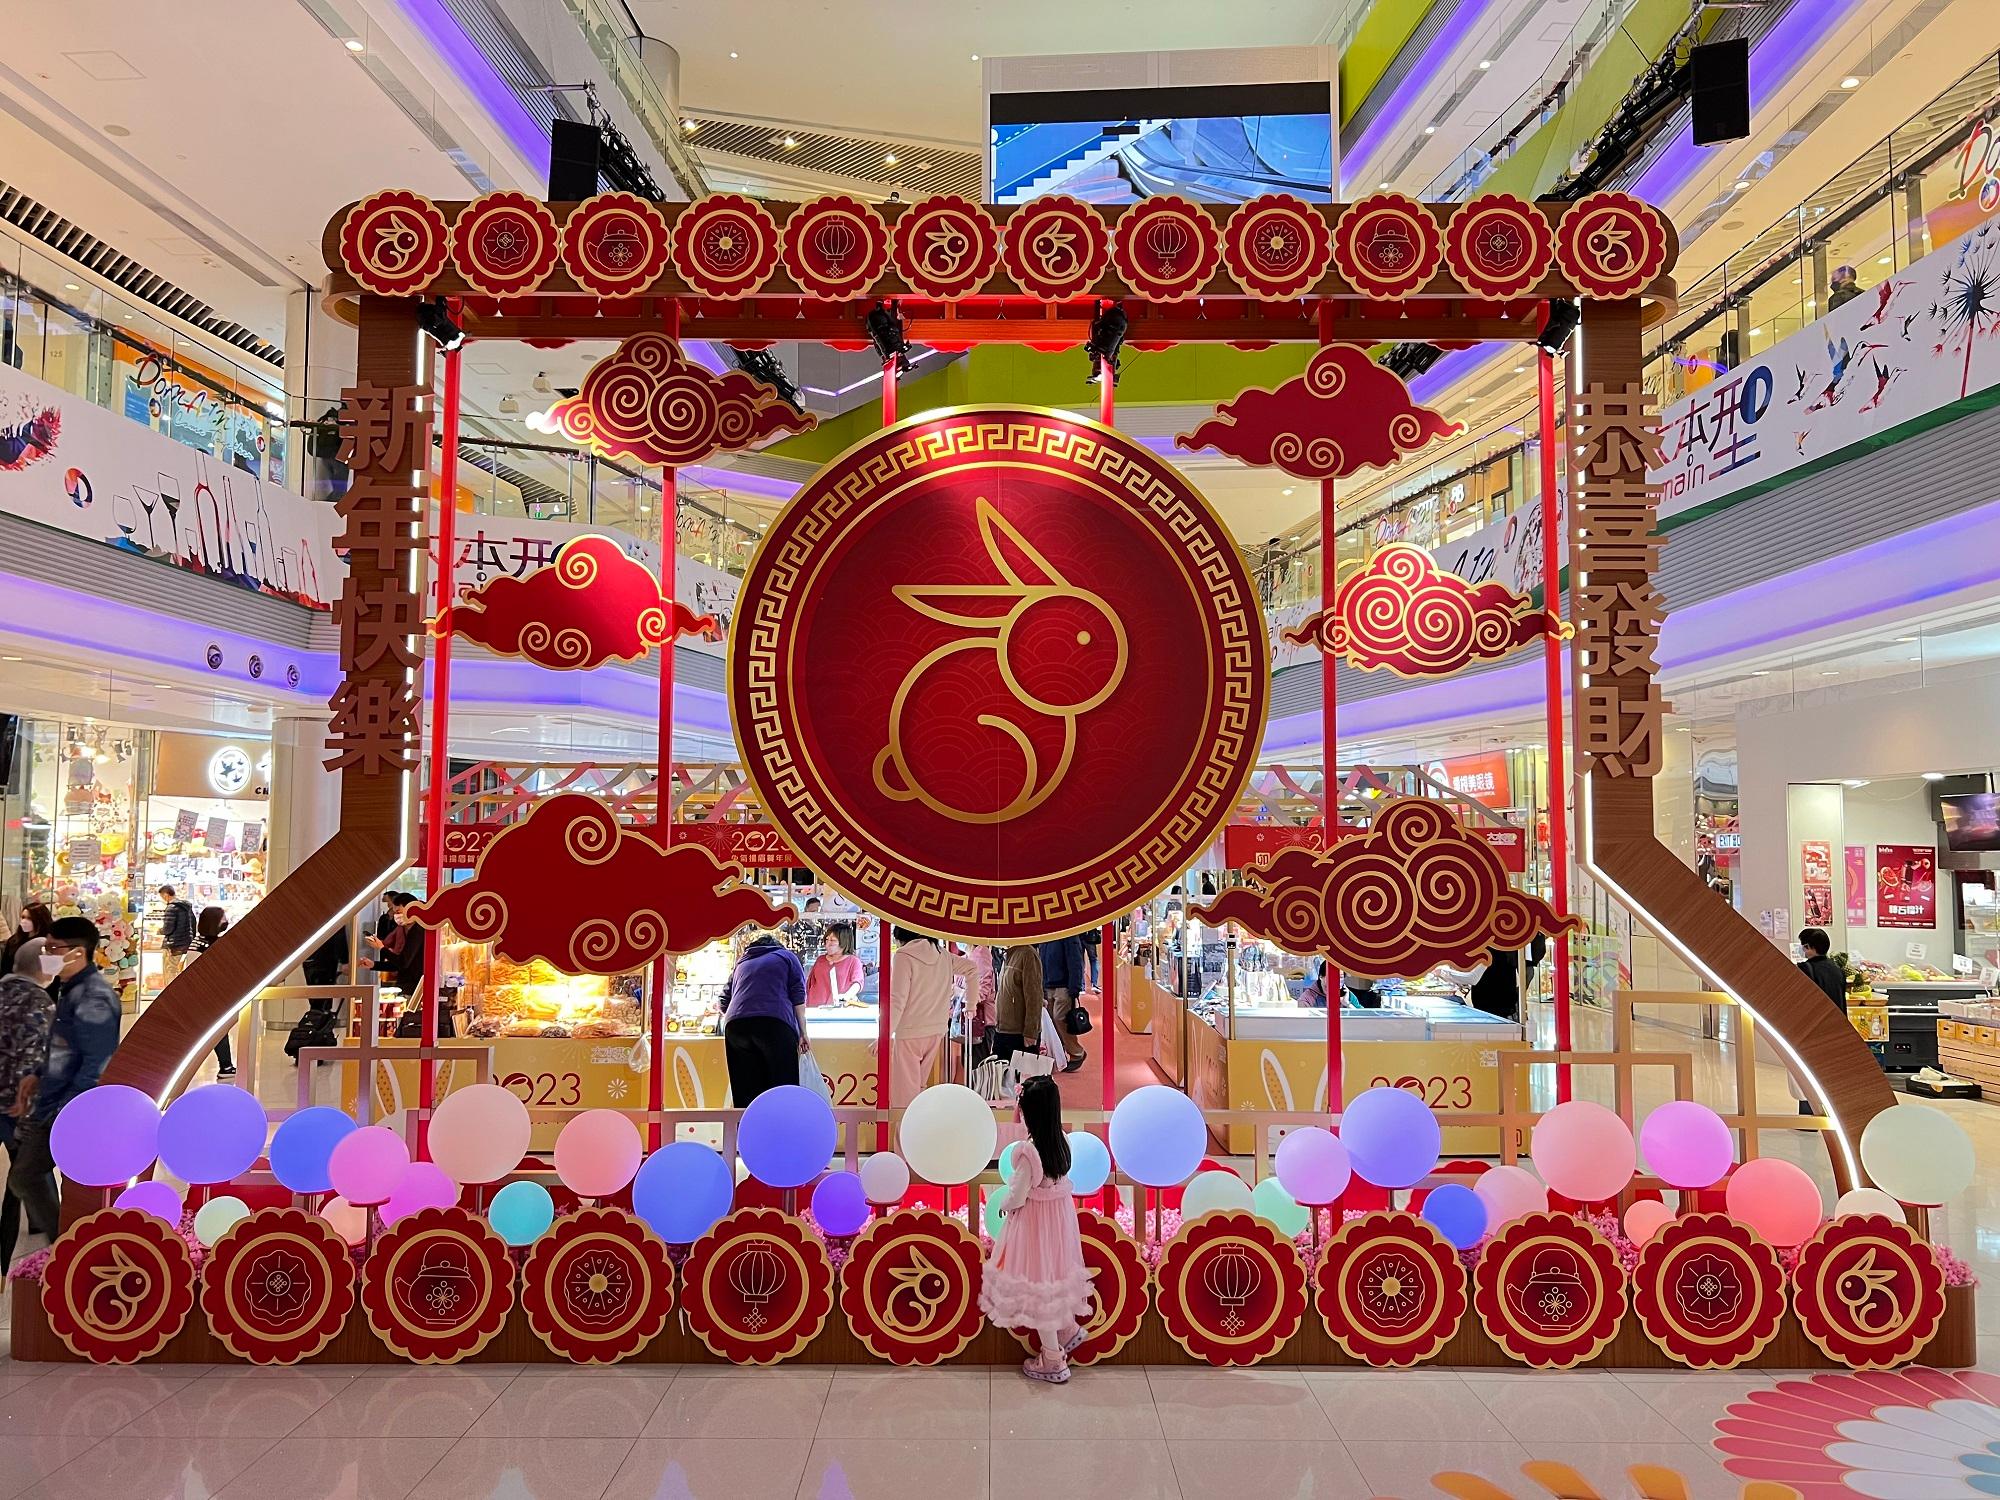 The Hong Kong Housing Authority has put up festive new year decorations at Domain, its regional shopping centre in Yau Tong, Kowloon. Photo shows one of the decorations.